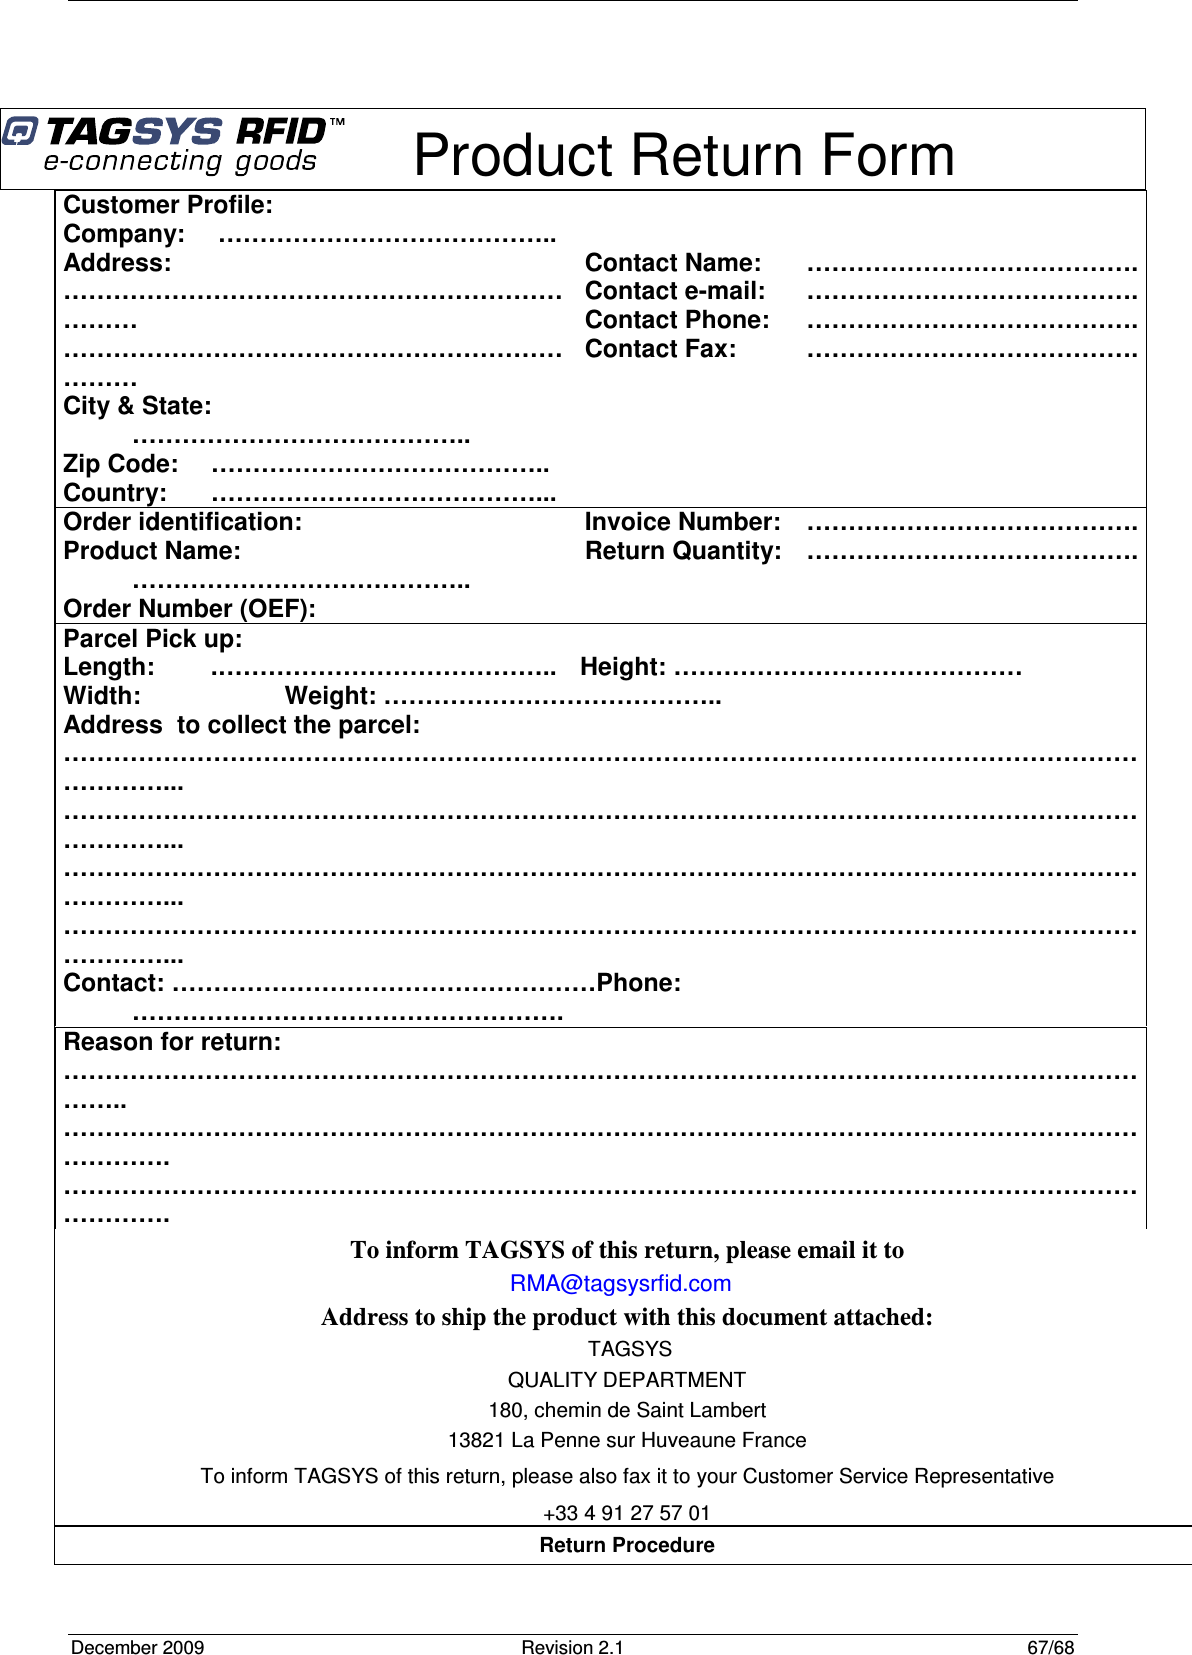  December 2009  Revision 2.1  67/68     Product Return Form Return Procedure To inform TAGSYS of this return, please email it to RMA@tagsysrfid.com Address to ship the product with this document attached:  TAGSYS QUALITY DEPARTMENT 180, chemin de Saint Lambert 13821 La Penne sur Huveaune France To inform TAGSYS of this return, please also fax it to your Customer Service Representative +33 4 91 27 57 01 Customer Profile: Company:   ………………………………….. Address:      …………………………………………………………… …………………………………………………………… City &amp; State:  ………………………………….. Zip Code:  ………………………………….. Country:  …………………………………...   Contact Name:  …………………………………. Contact e-mail:   …………………………………. Contact Phone:  …………………………………. Contact Fax:  …………………………………. Order identification: Product Name:  ………………………………….. Order Number (OEF):   Invoice Number:  …………………………………. Return Quantity:   …………………………………. Parcel Pick up: Length:   .…………………………………..  Height: …………………………………… Width:     Weight: ………………………………….. Address  to collect the parcel: ……………………………………………………………………………………………………………………………... ……………………………………………………………………………………………………………………………... ……………………………………………………………………………………………………………………………... ……………………………………………………………………………………………………………………………... Contact: ……………………………………………Phone:   ……………………………………………. Reason for return: ……………………………………………………………………………………………………………………….. ……………………………………………………………………………………………………………………………. ……………………………………………………………………………………………………………………………. 